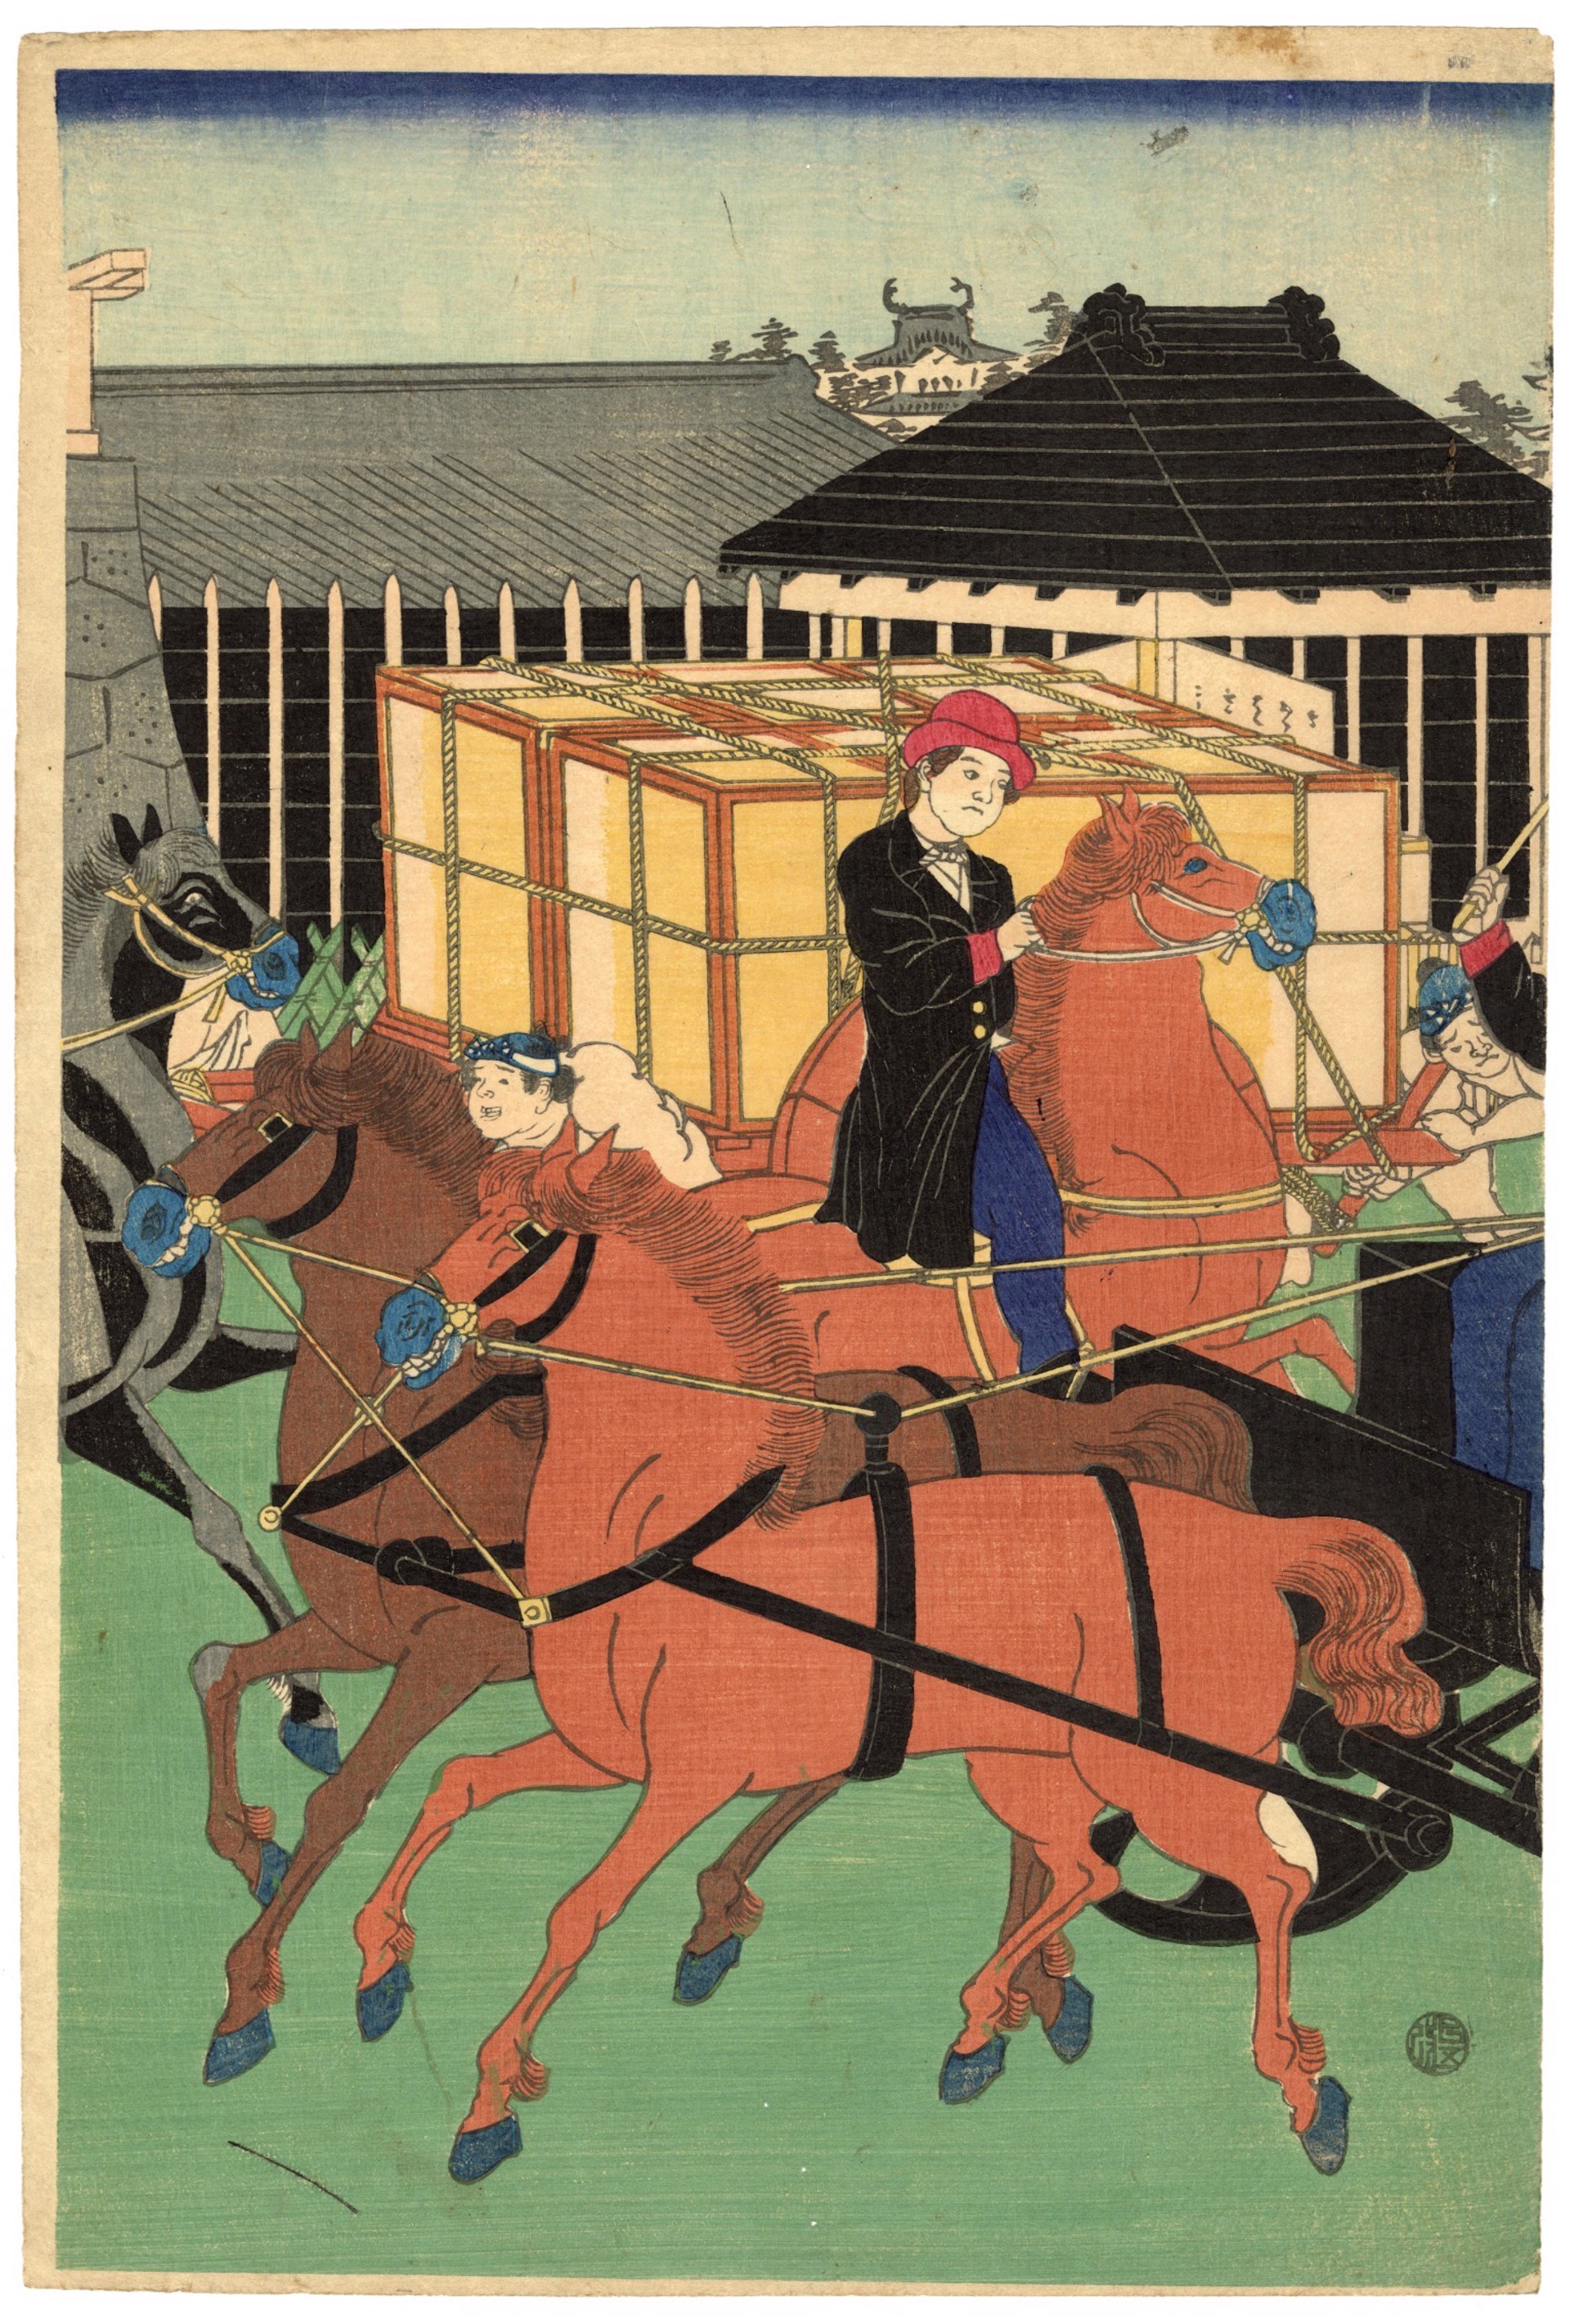 View of a Thoroughfare for Horse Drawn Carriages in Nihonbashi, Tokyo by Yoshitora